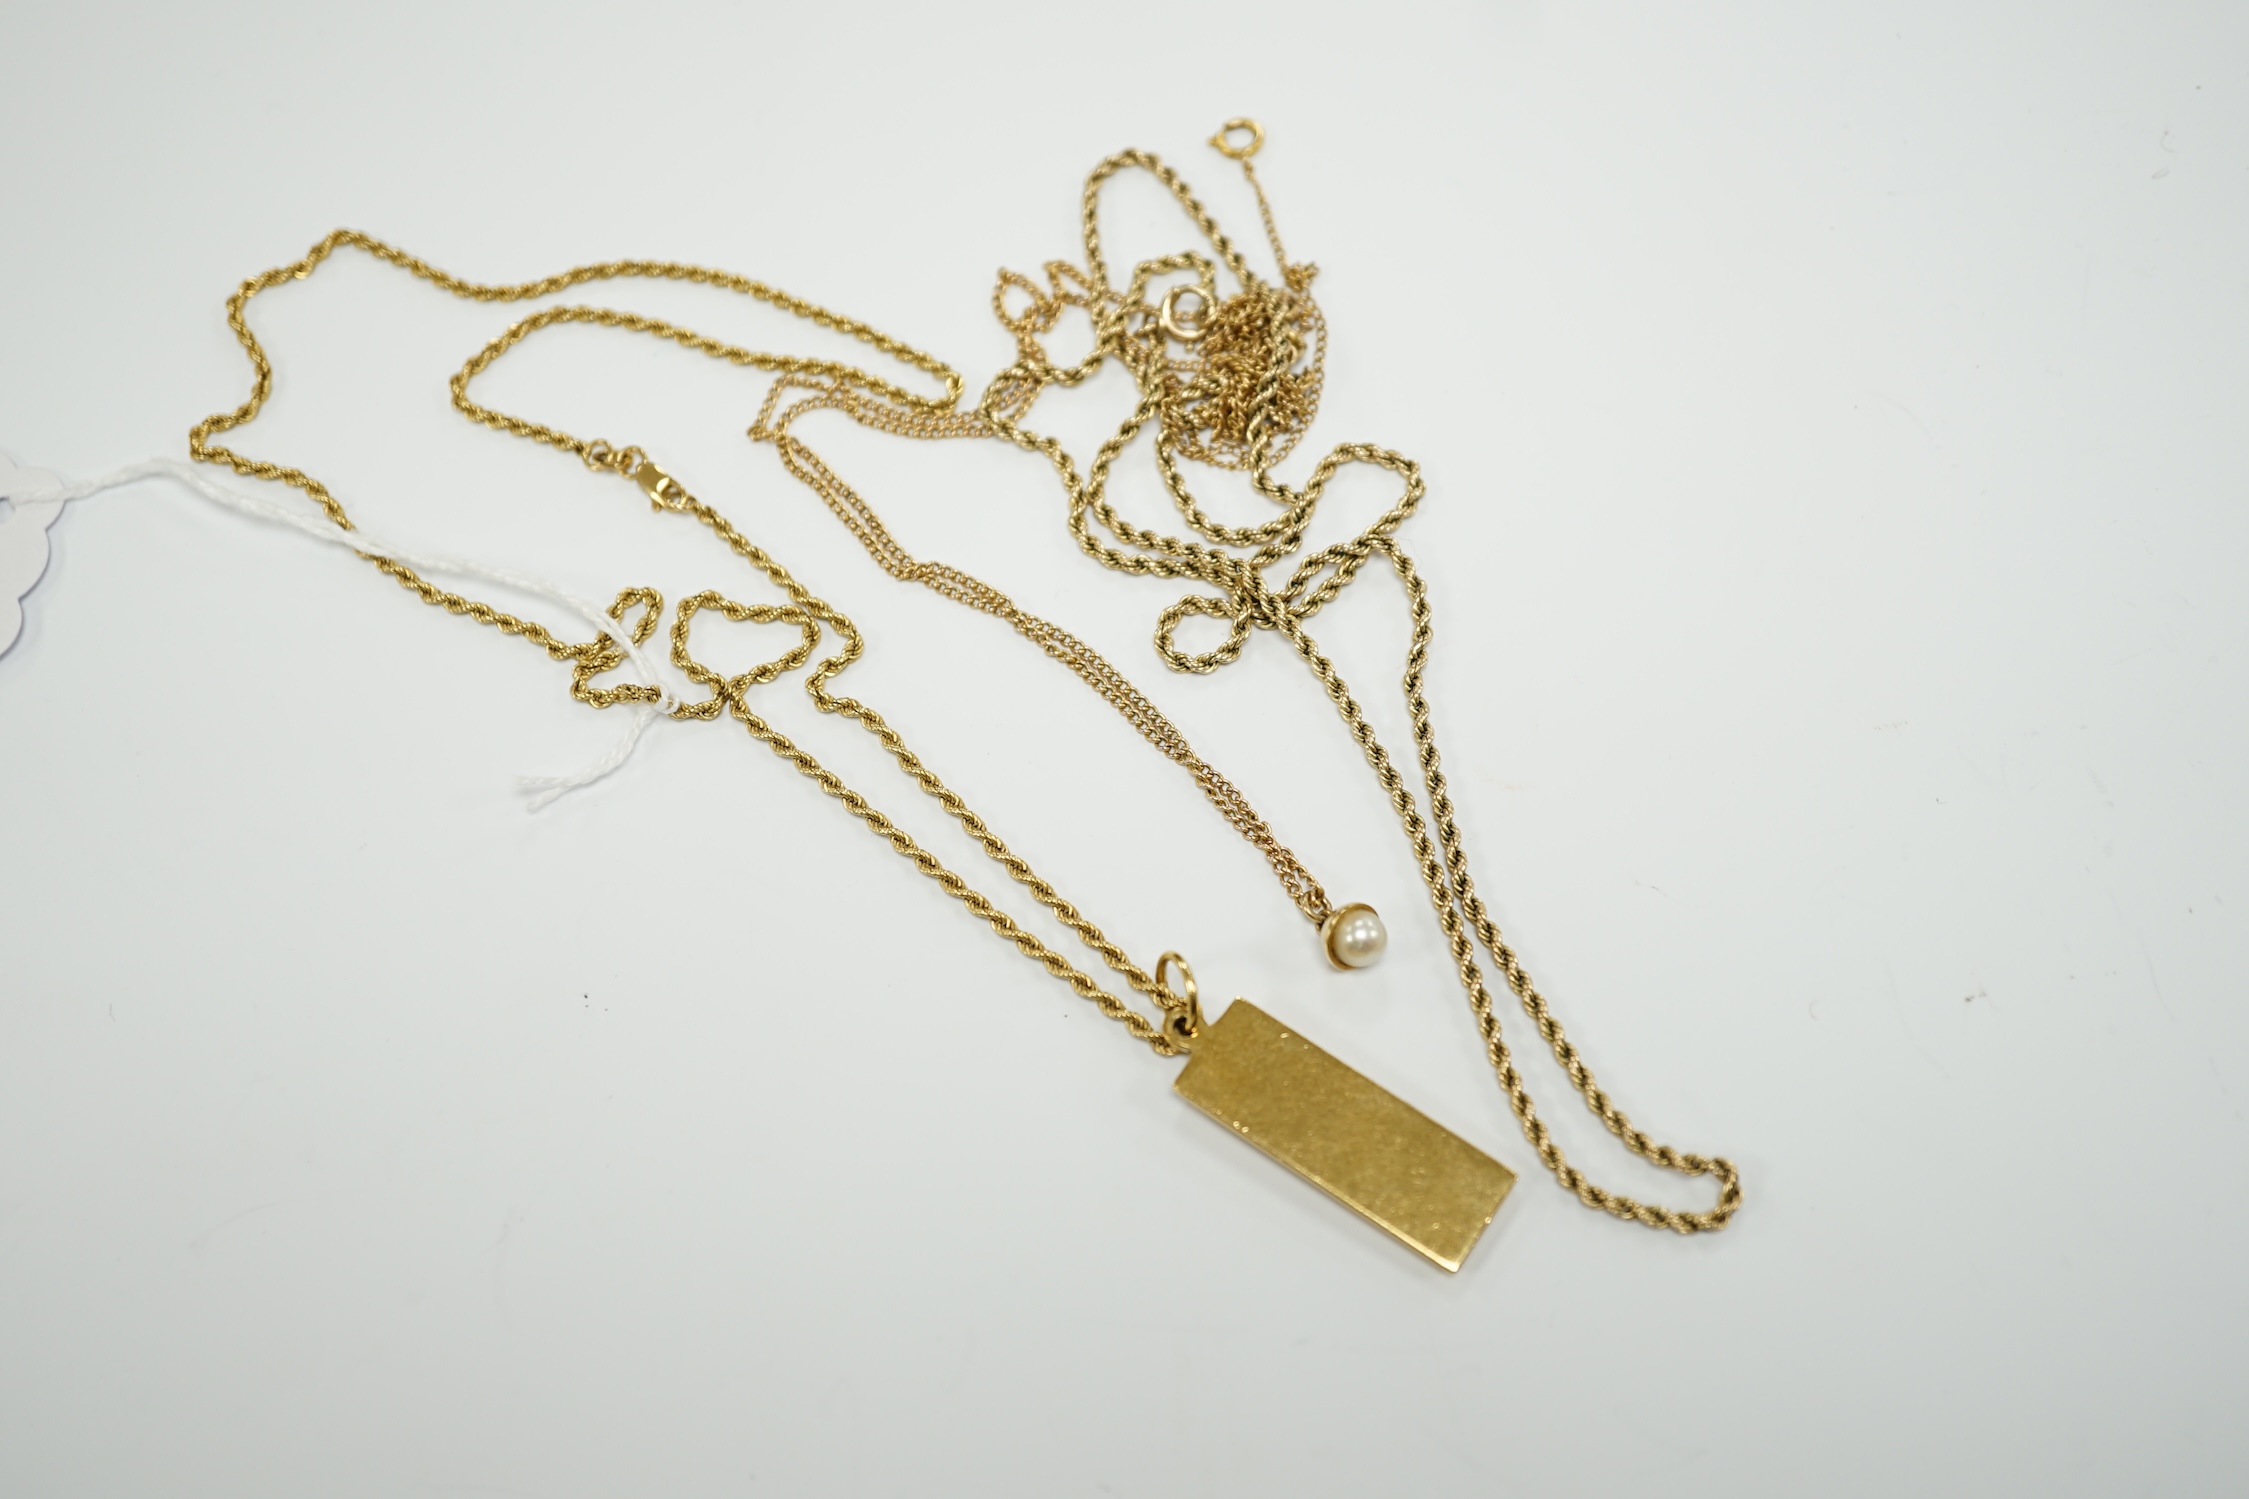 An 18ct gold ingot pendant on an 18k chain, 26.7 grams and two 9ct chains, one with cultured pearl - Image 4 of 7